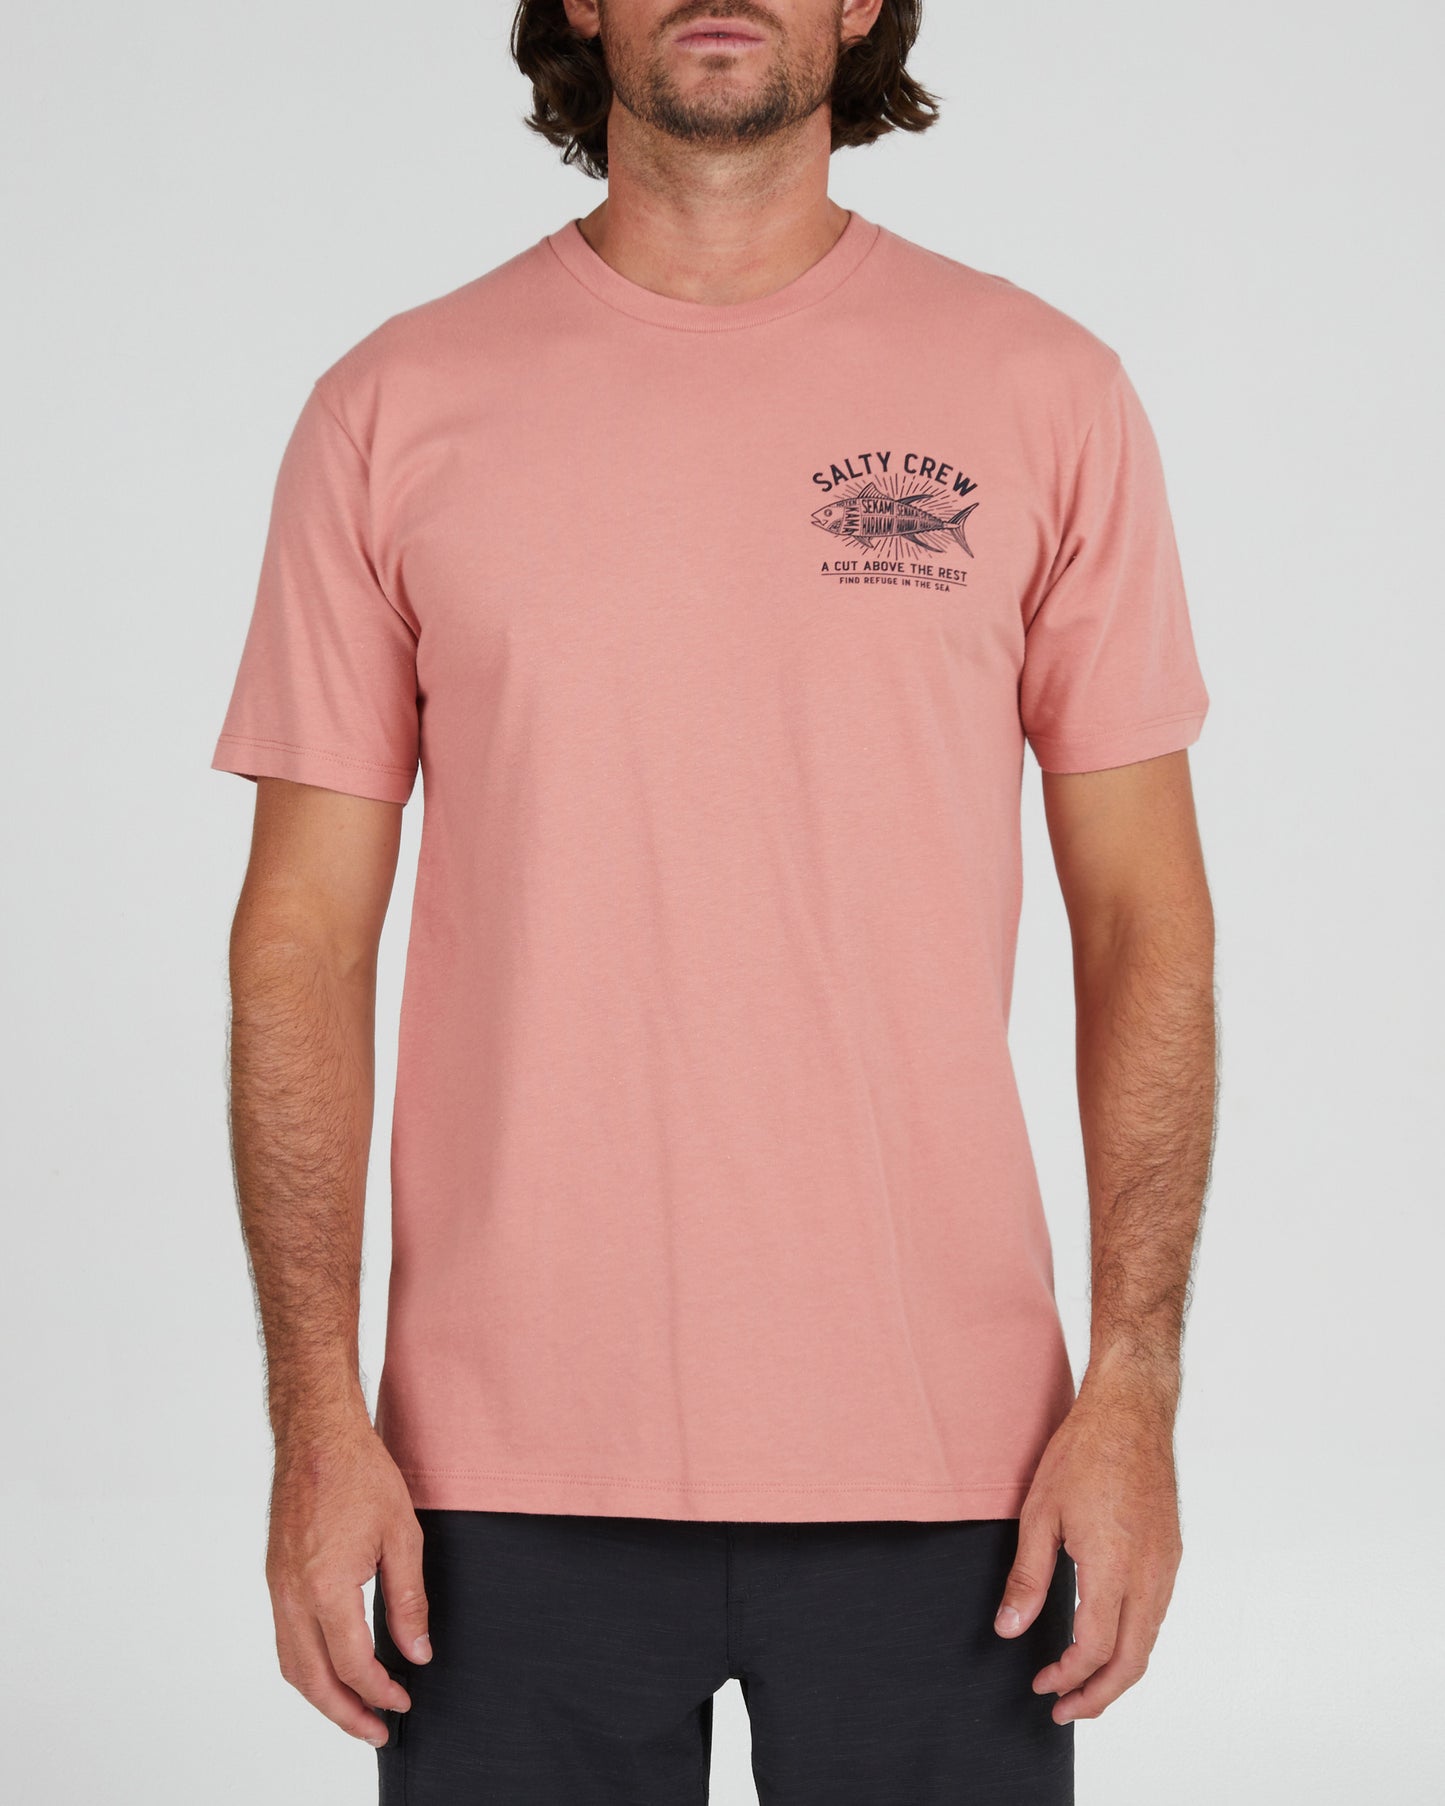 On body front of the Cut Above Coral S/S Premium Tee